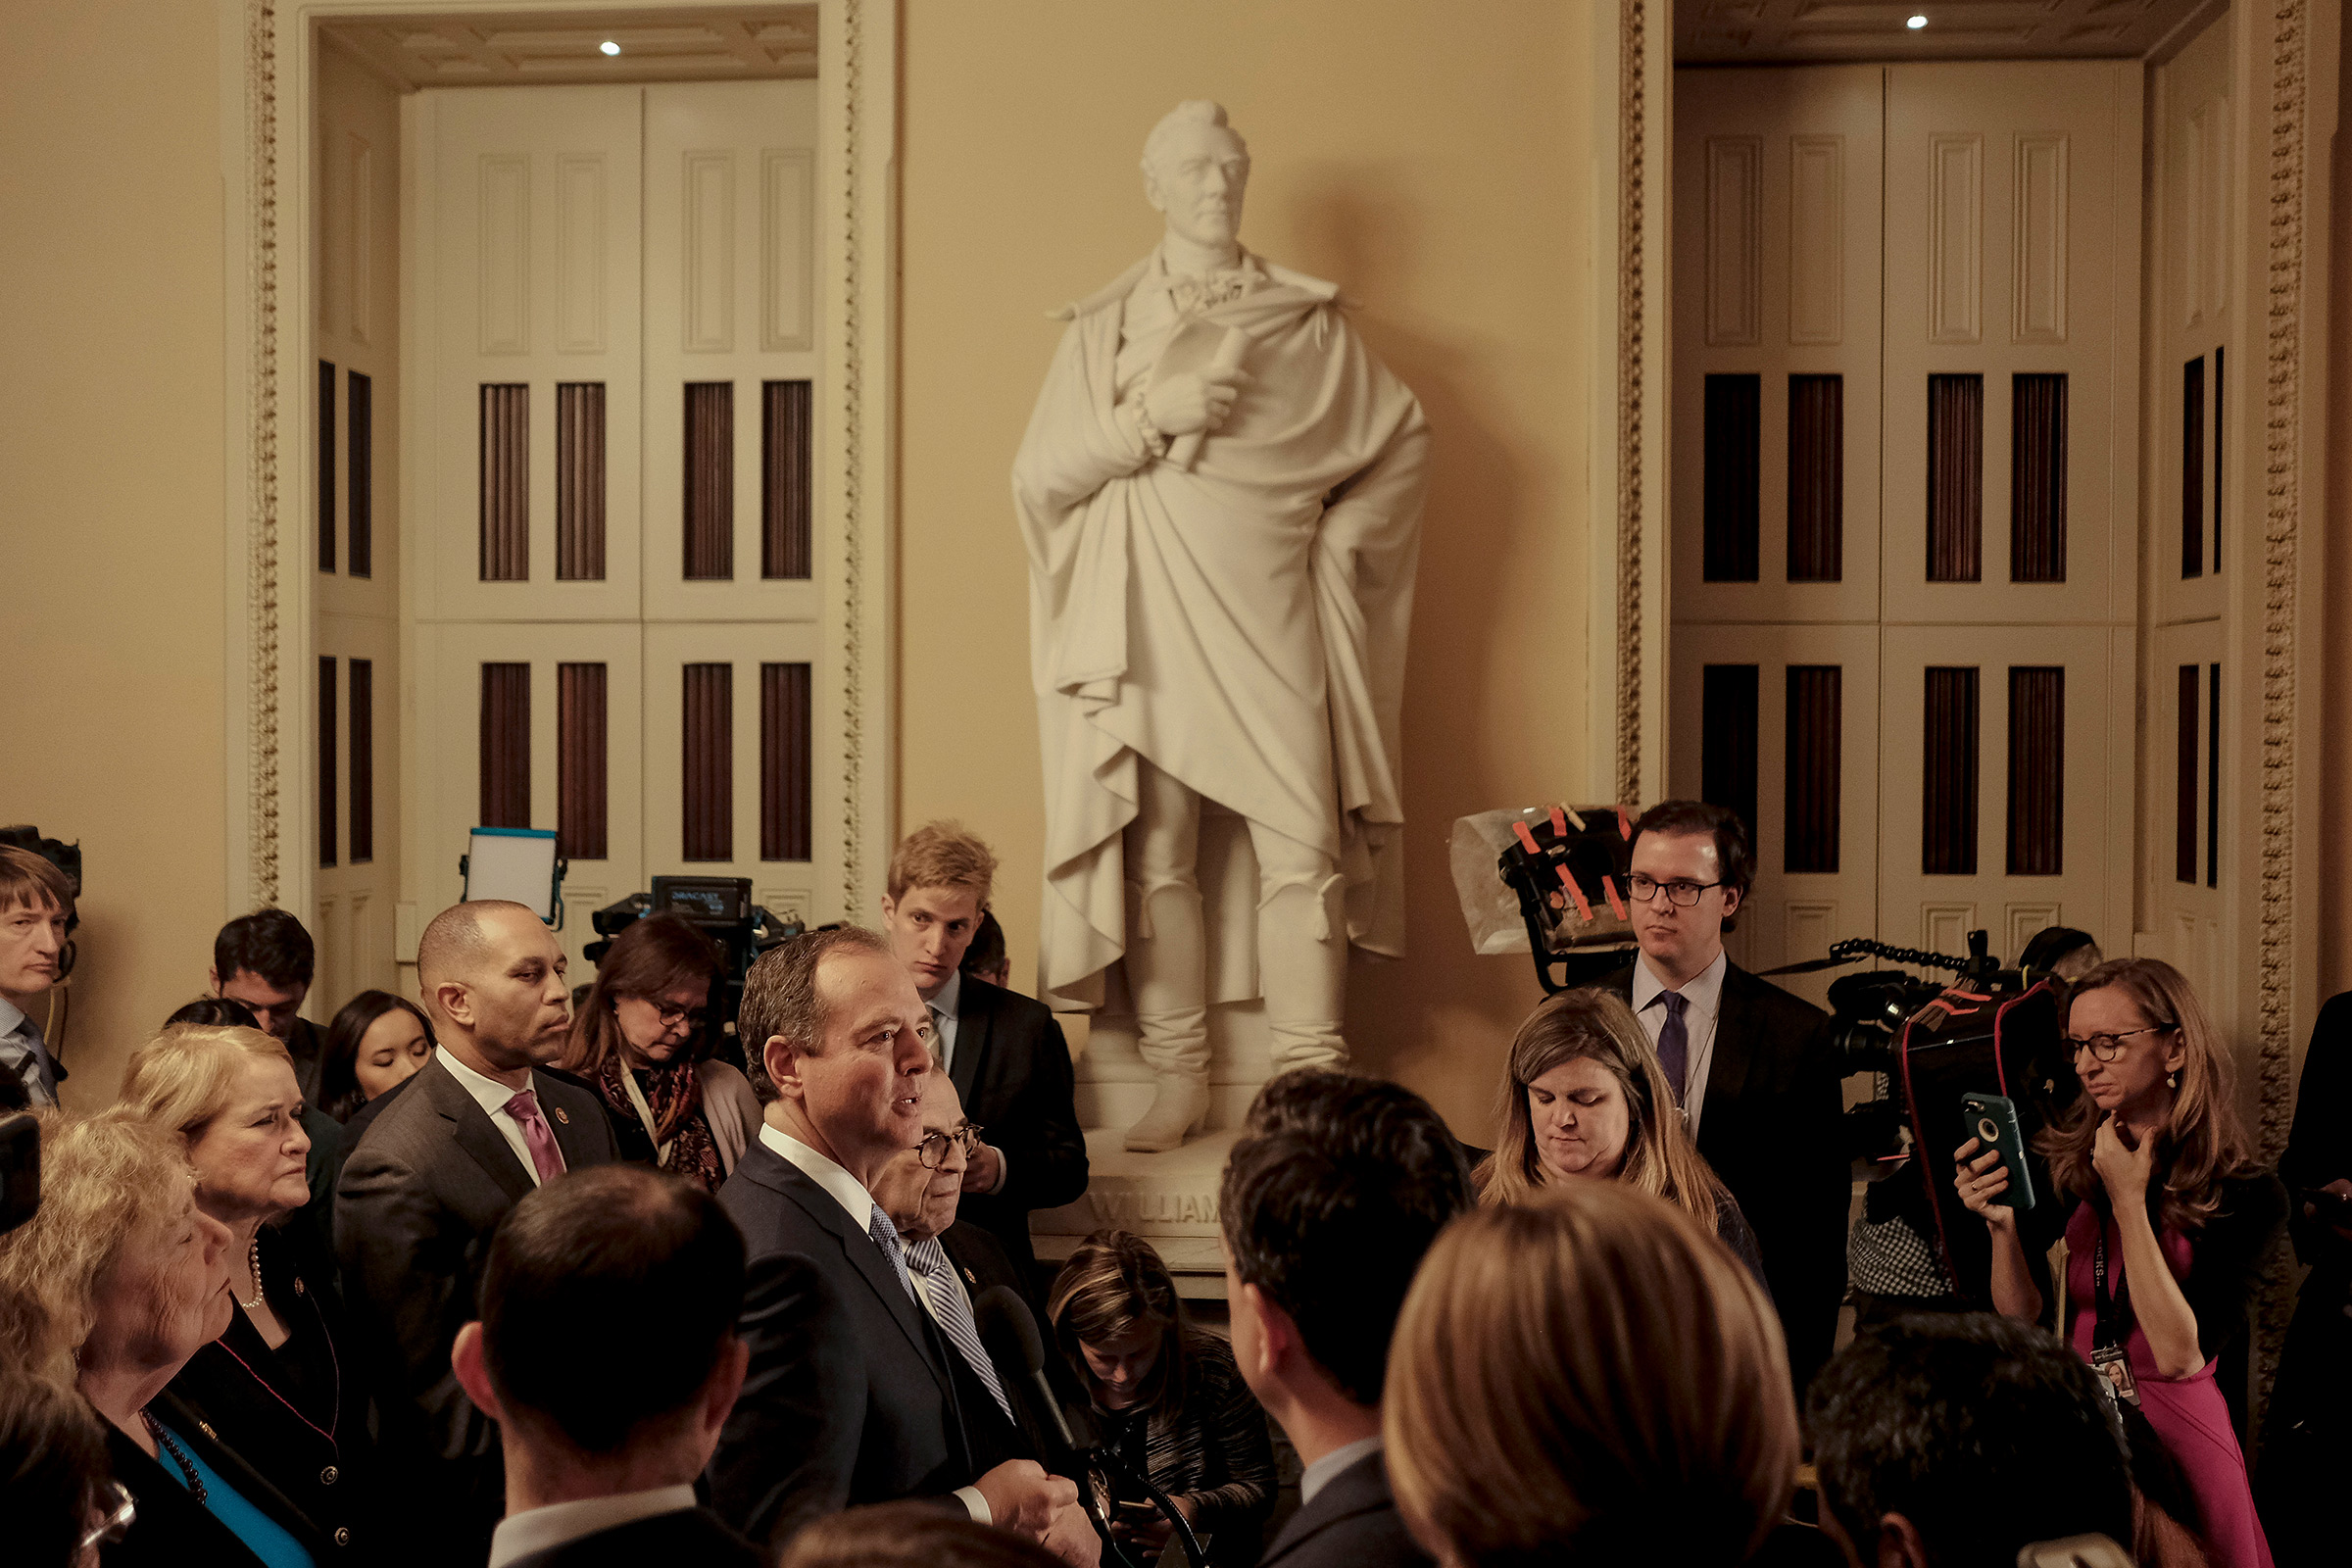 Rep. Adam Schiff, along with other House managers, speaks to reporters at a press conference before the start of the senate impeachment trial at the Capitol in Washington, D.C. on Jan. 21, 2020. (Gabriella Demczuk for TIME)